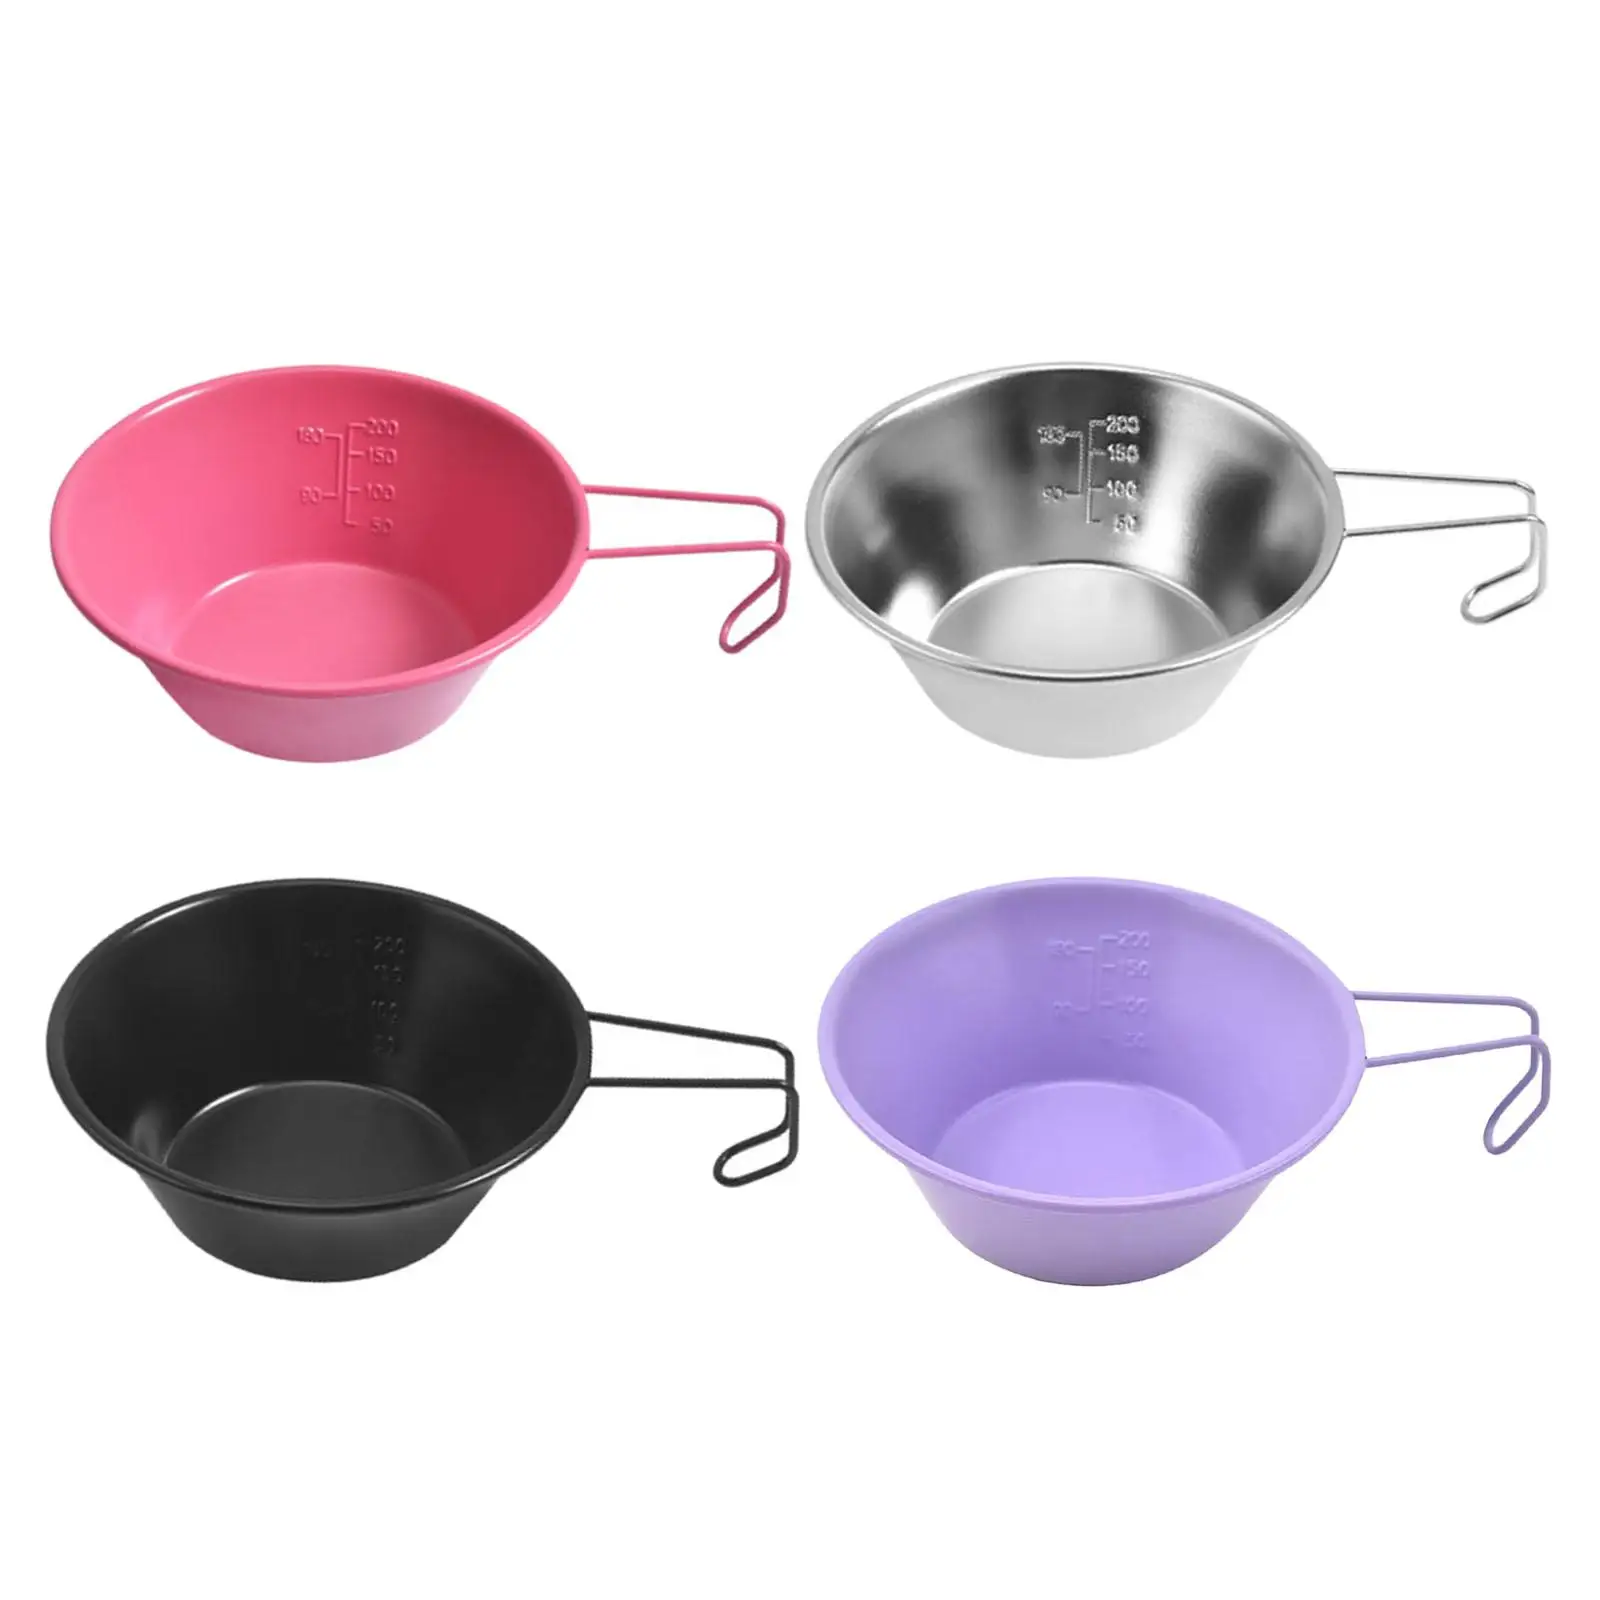 Camping Bowl Portable Cooking Food Drink Container Stainless Steel Outdoor Bowl Utensil for BBQ Barbecue Hiking Kitchen Fishing